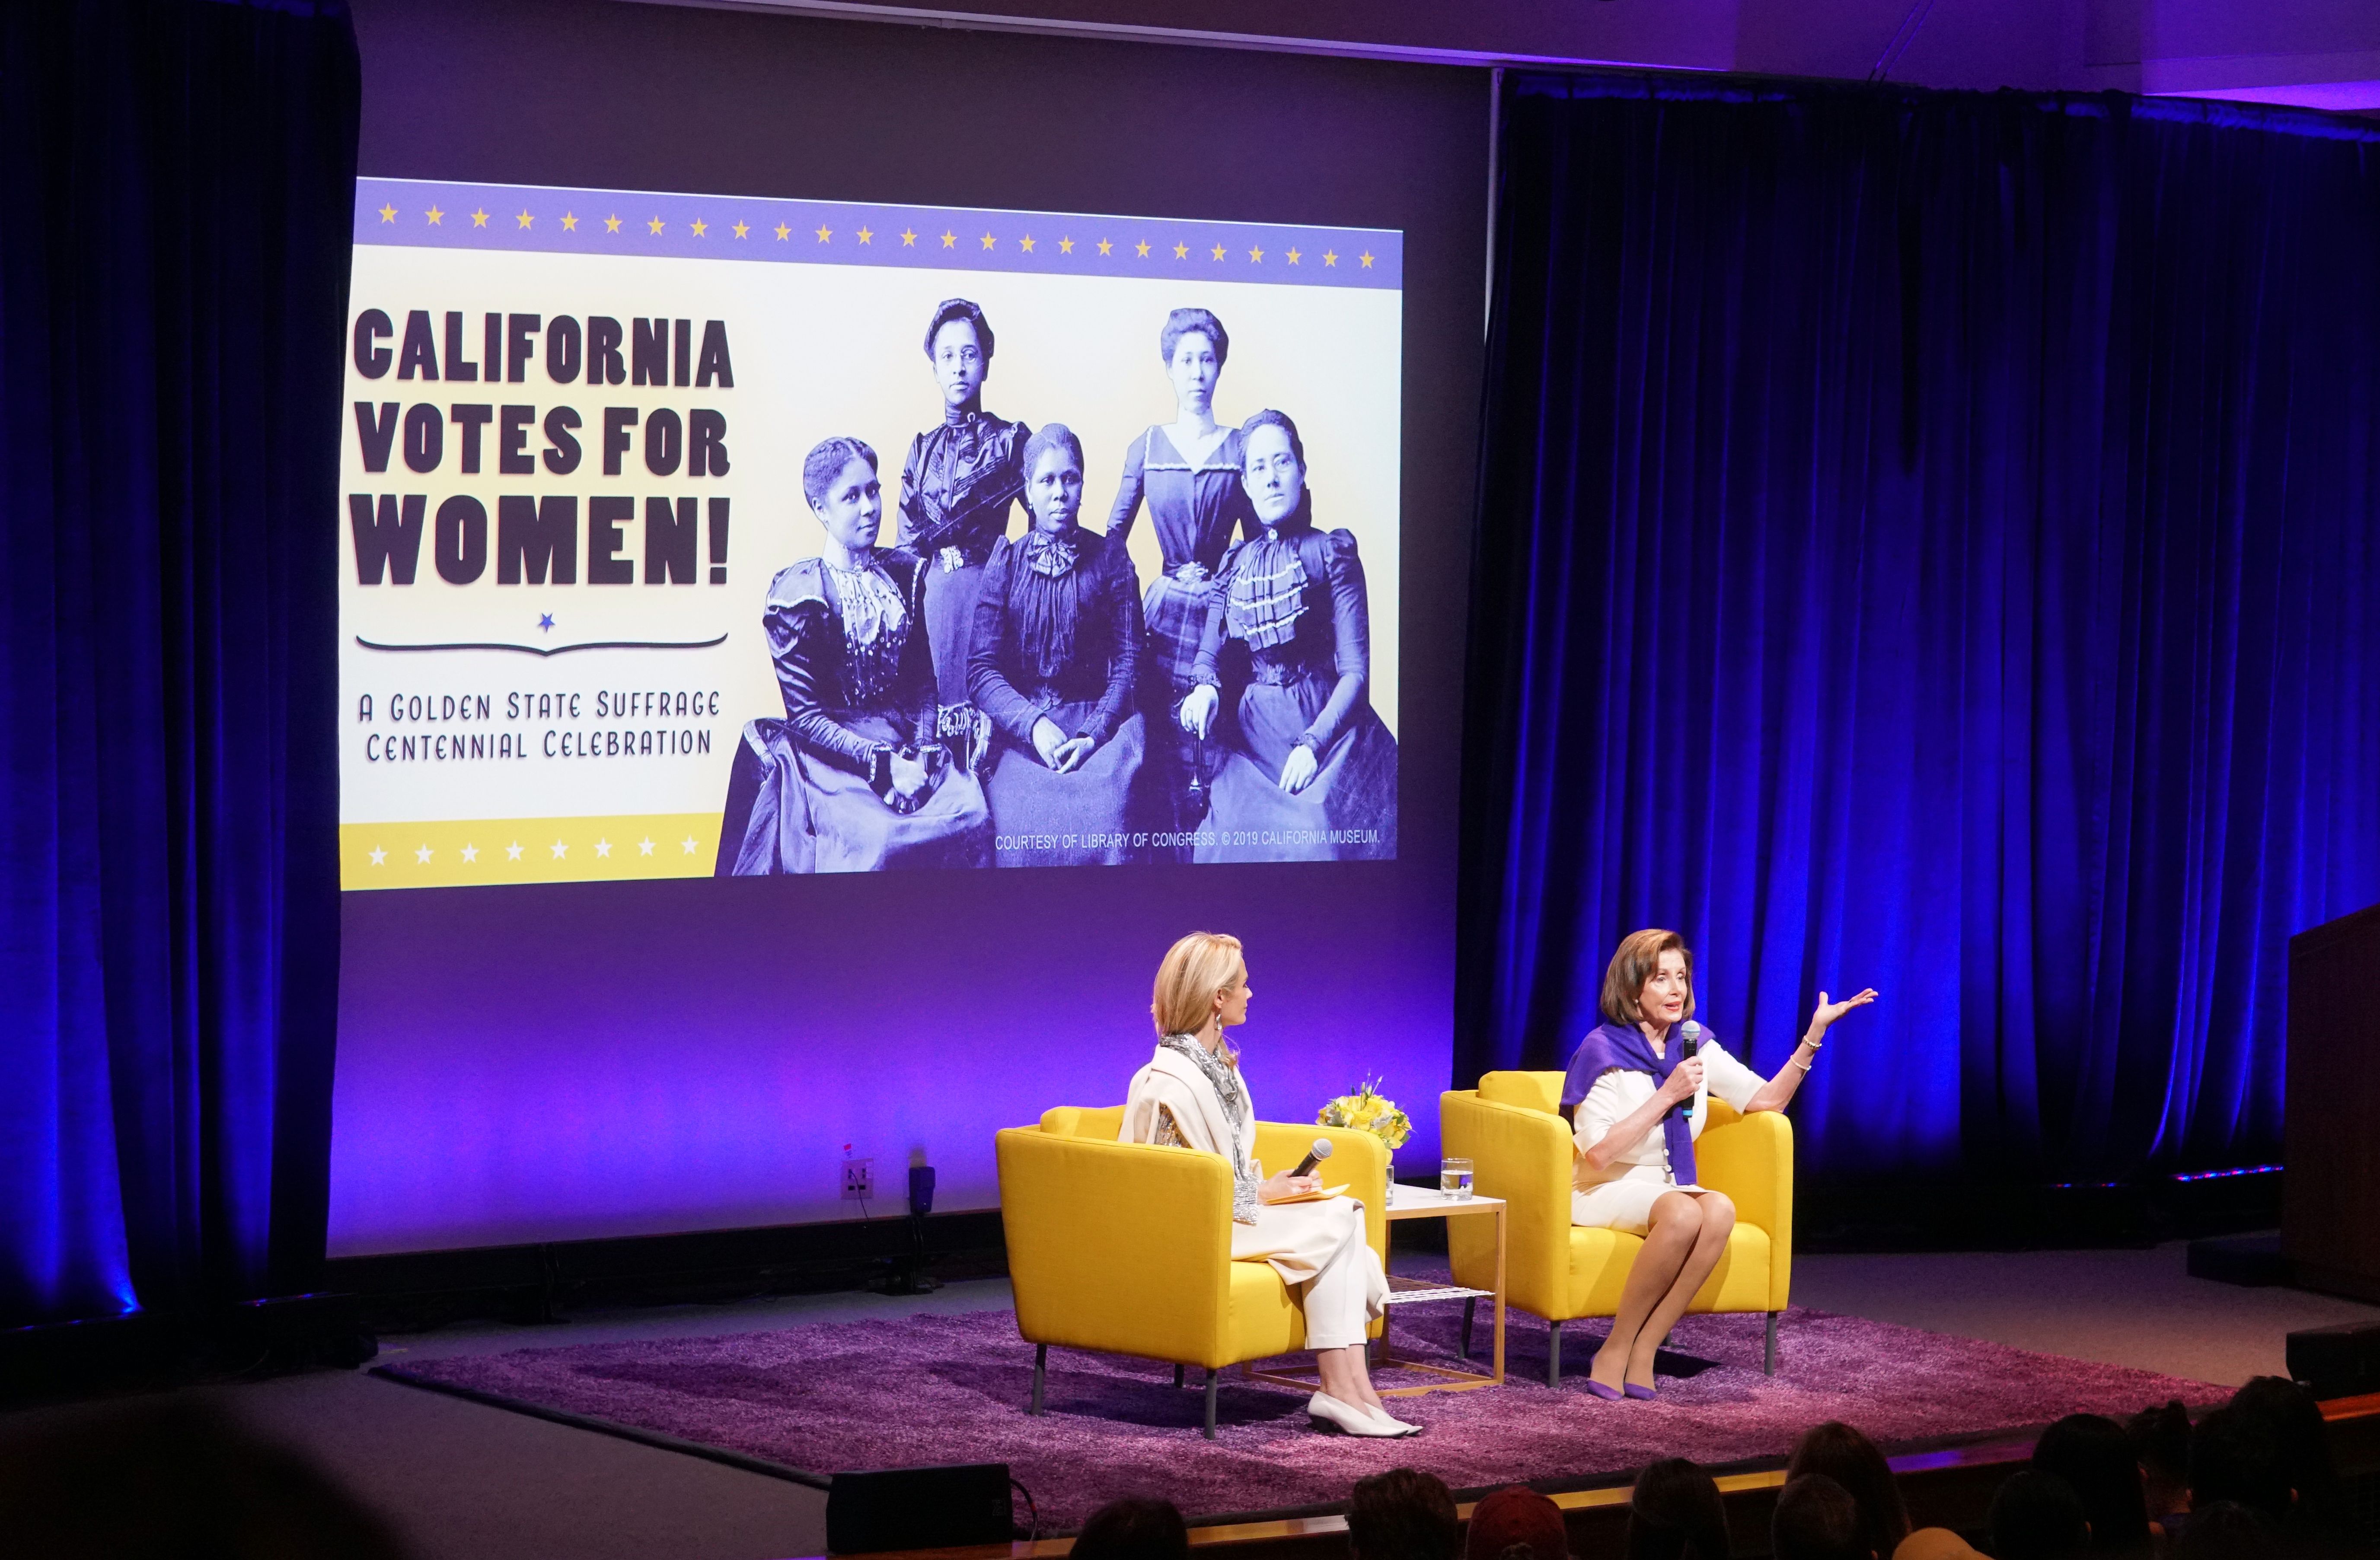 Congresswoman Nancy Pelosi participates in a moderated conversation with California First Partner Jennifer Siebel Newsom for a discussion on the women’s suffrage movement in California.